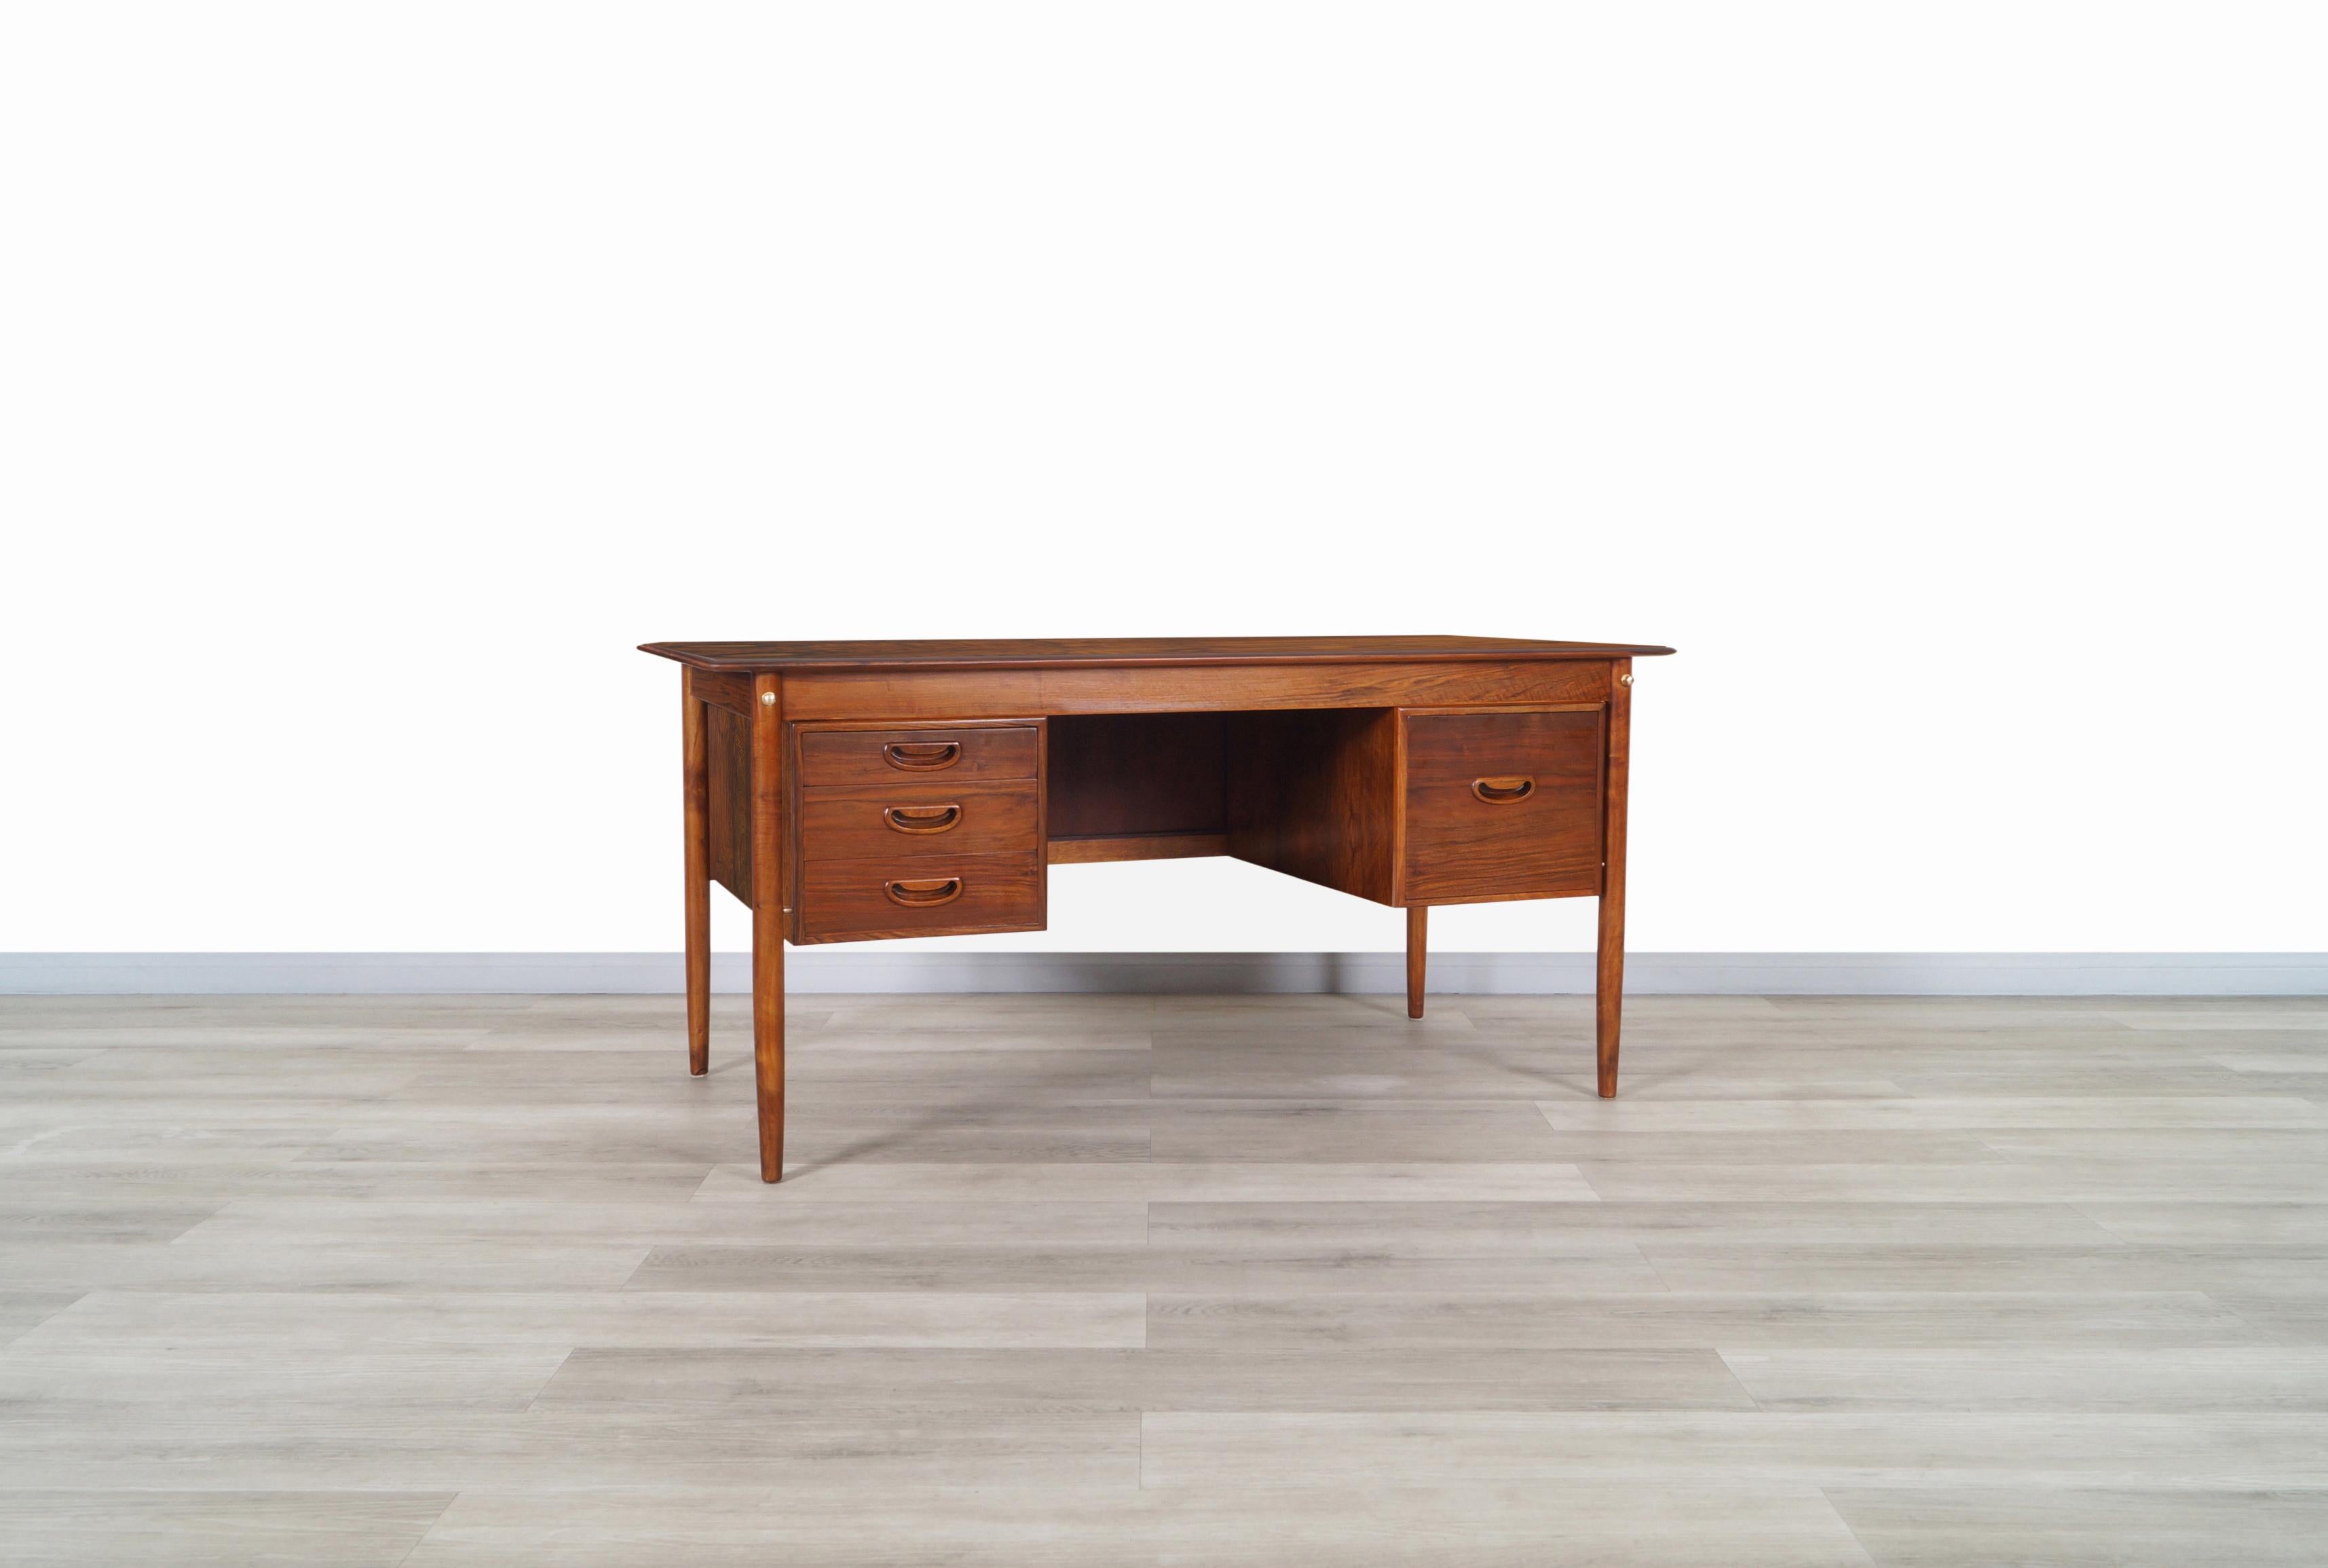 Amazing Danish modern rosewood desk manufactured in Denmark, circa 1960s. Features three dovetail drawers and a file drawer where the aesthetic and Minimalist design of the handles in each drawer stand out. The structure of the desk is extremely